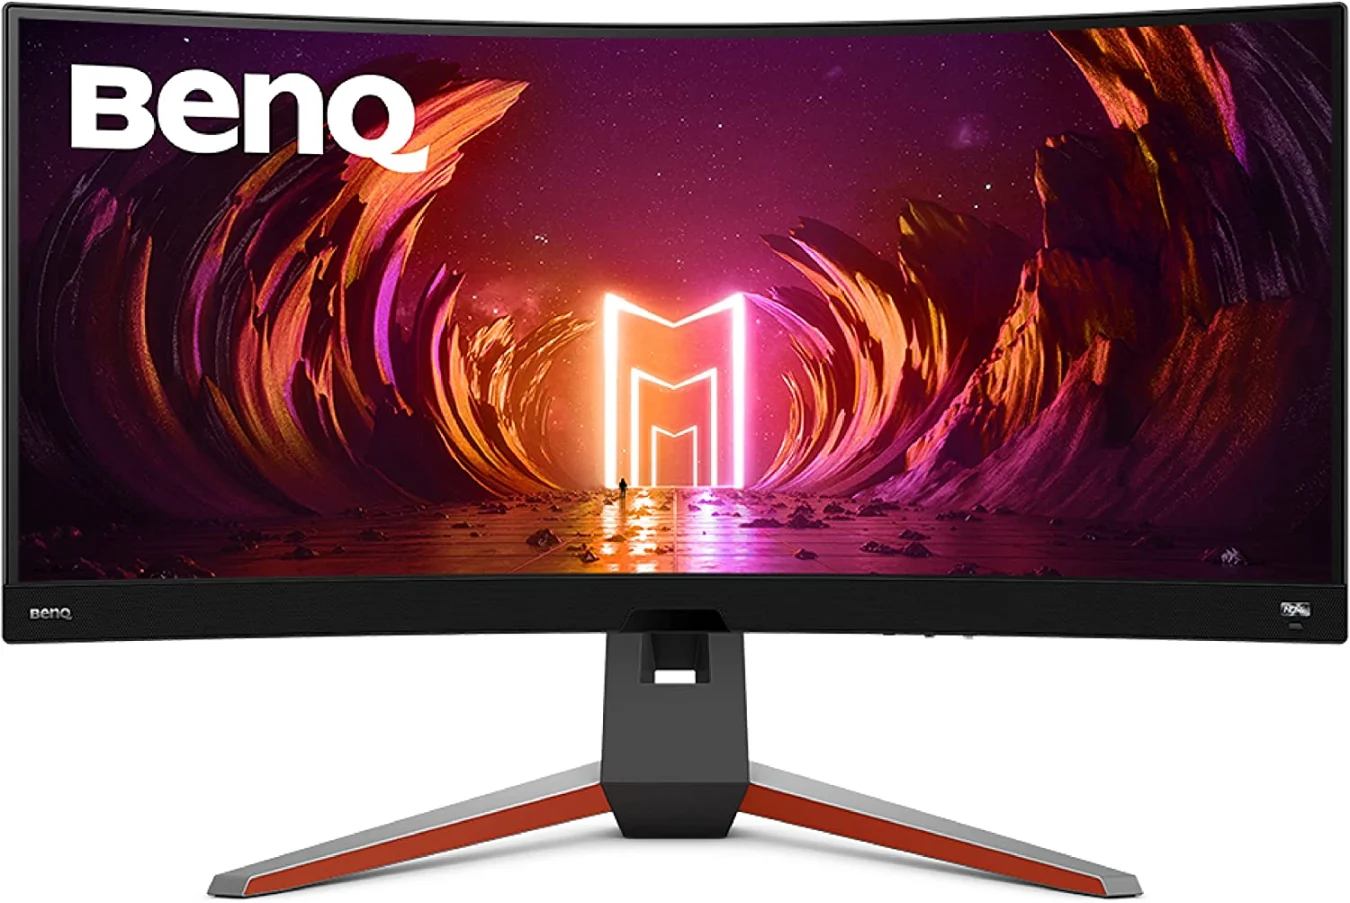 BenQ curved gaming monitor